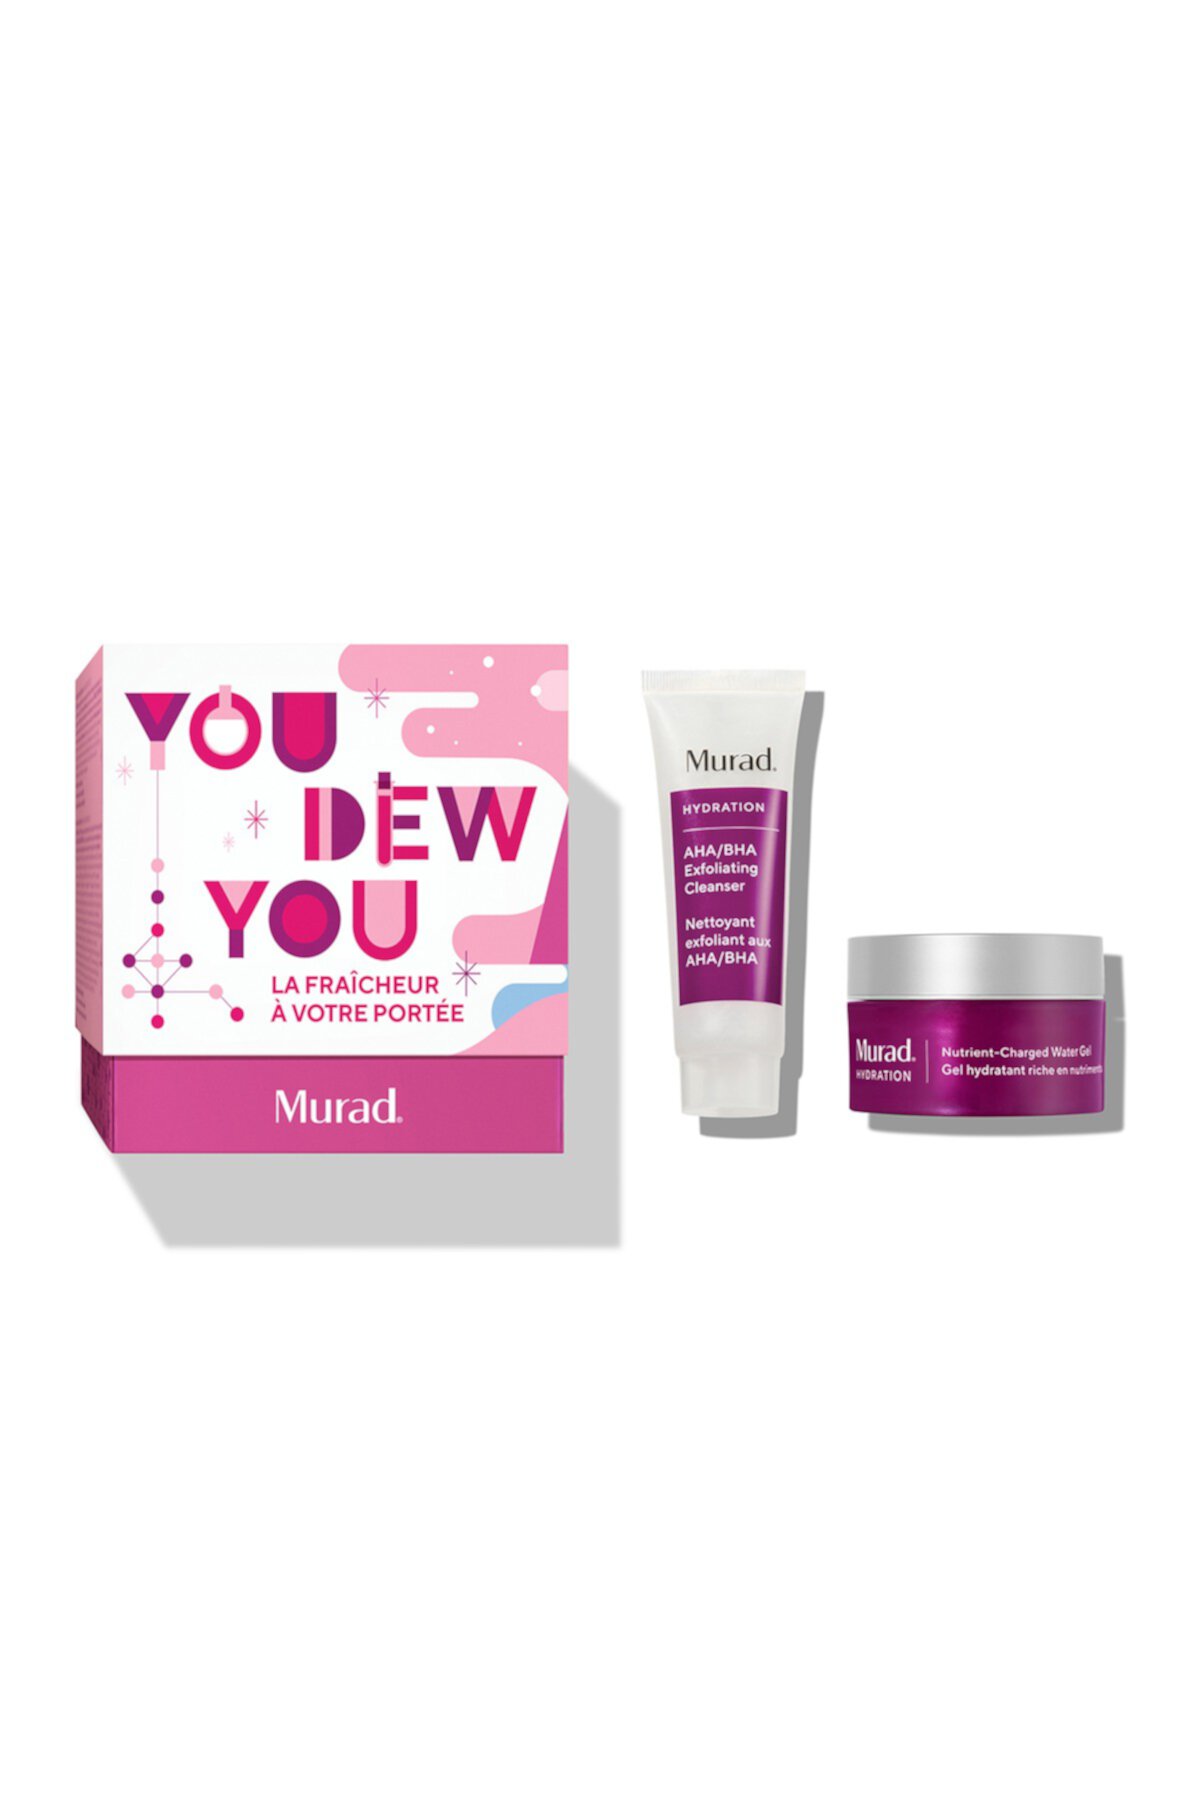 You Dew You Limited Edition Duo Murad